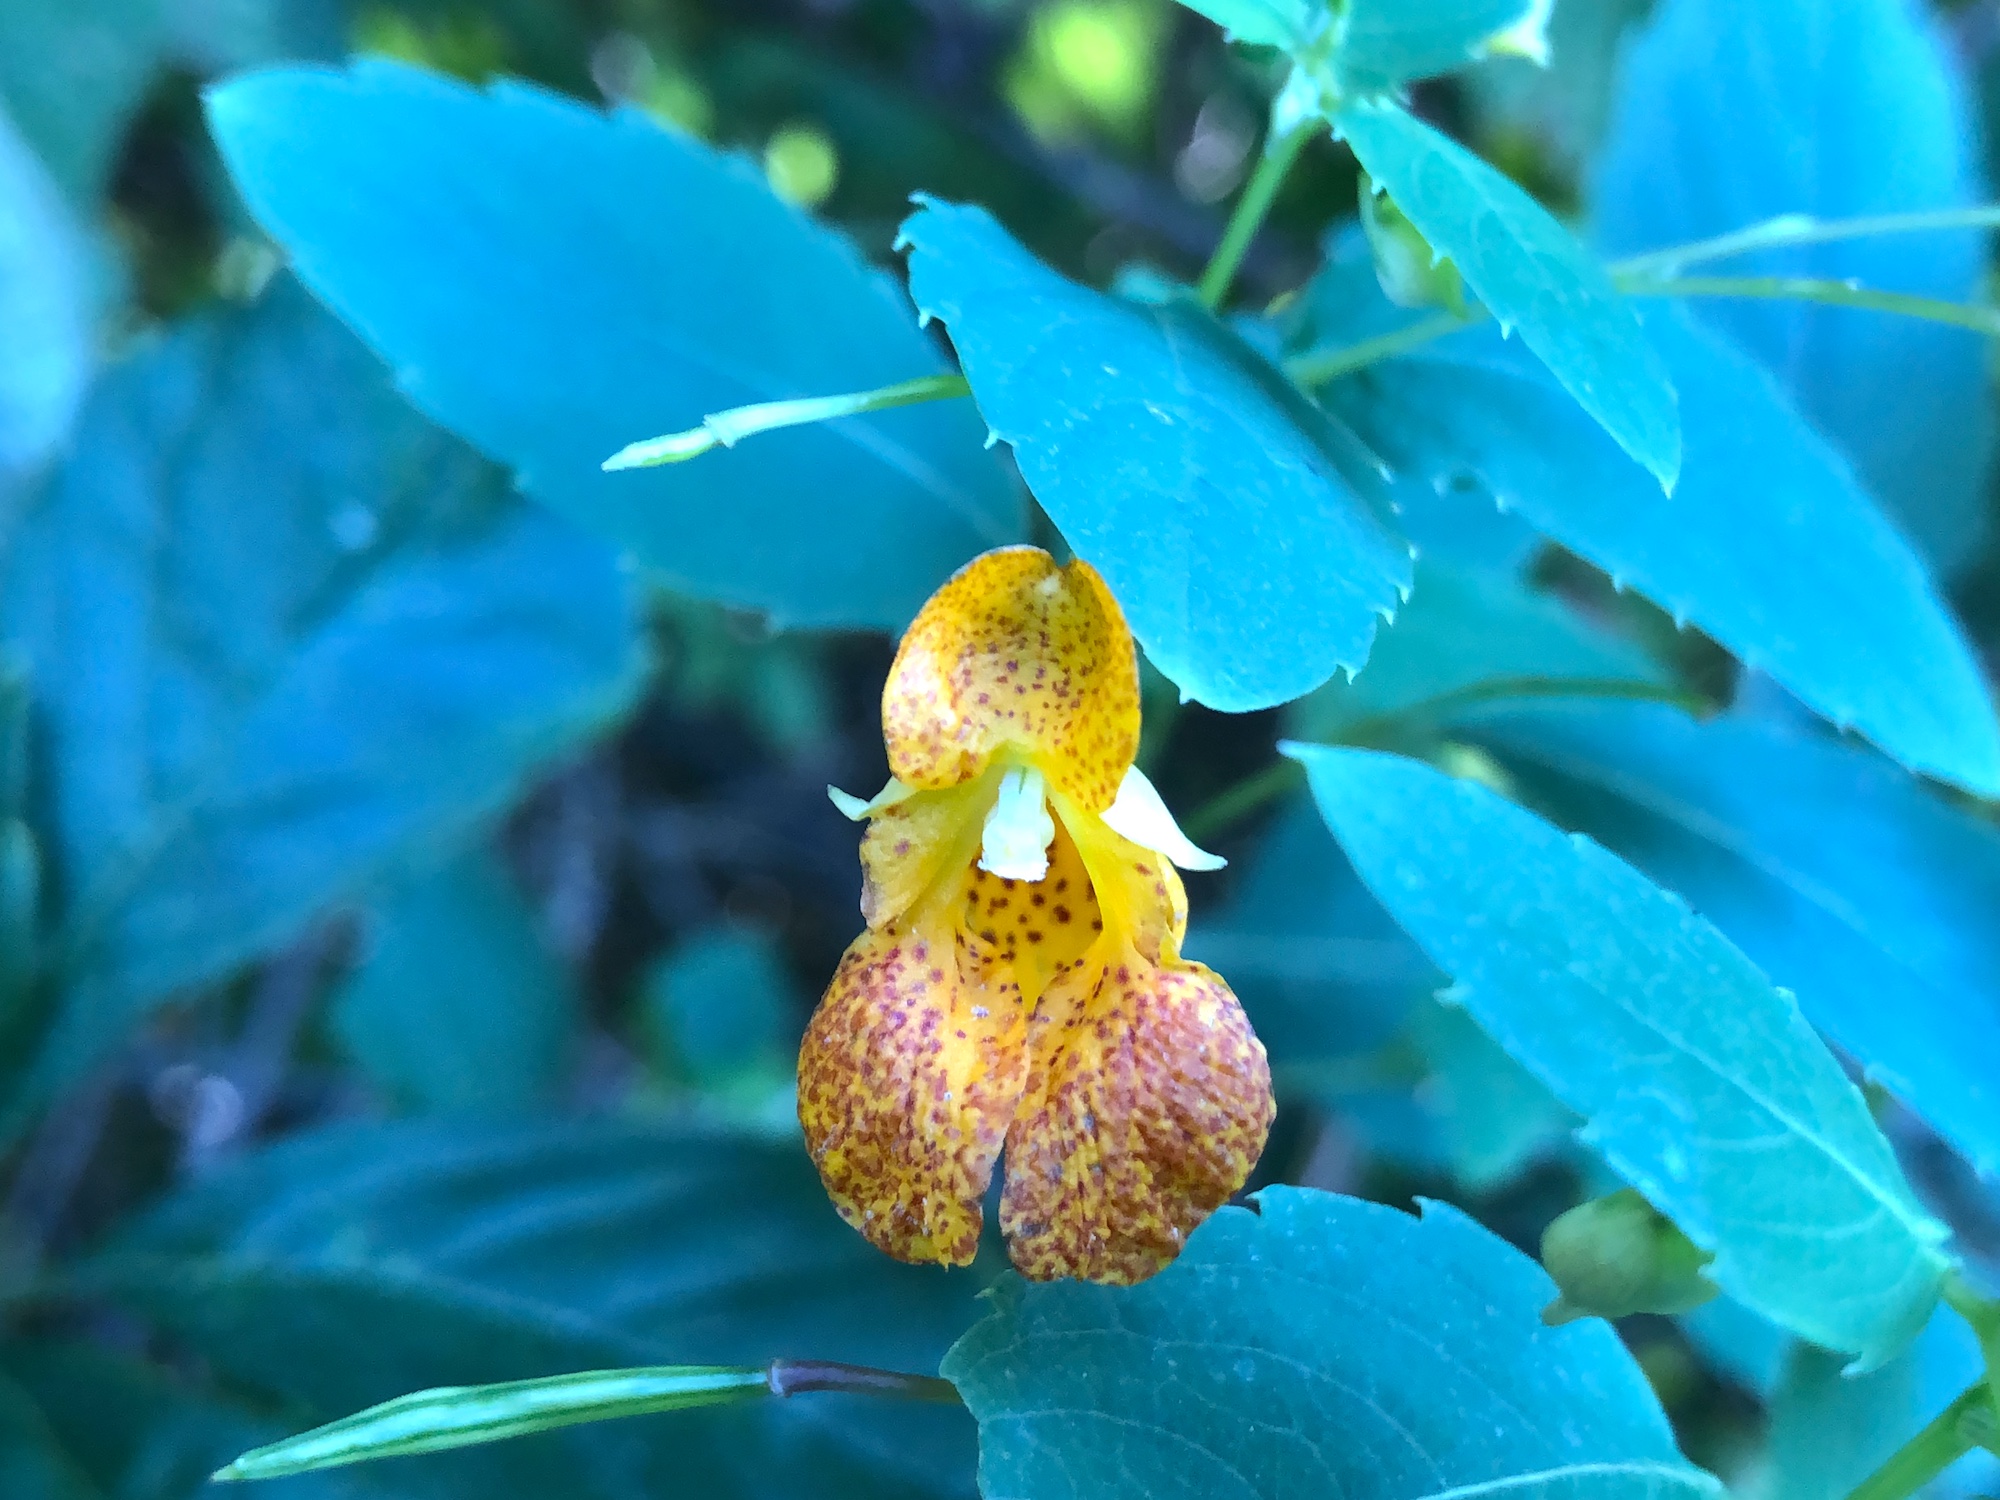 Spotted Jewelweed in Nakoma Park on August29, 2019.